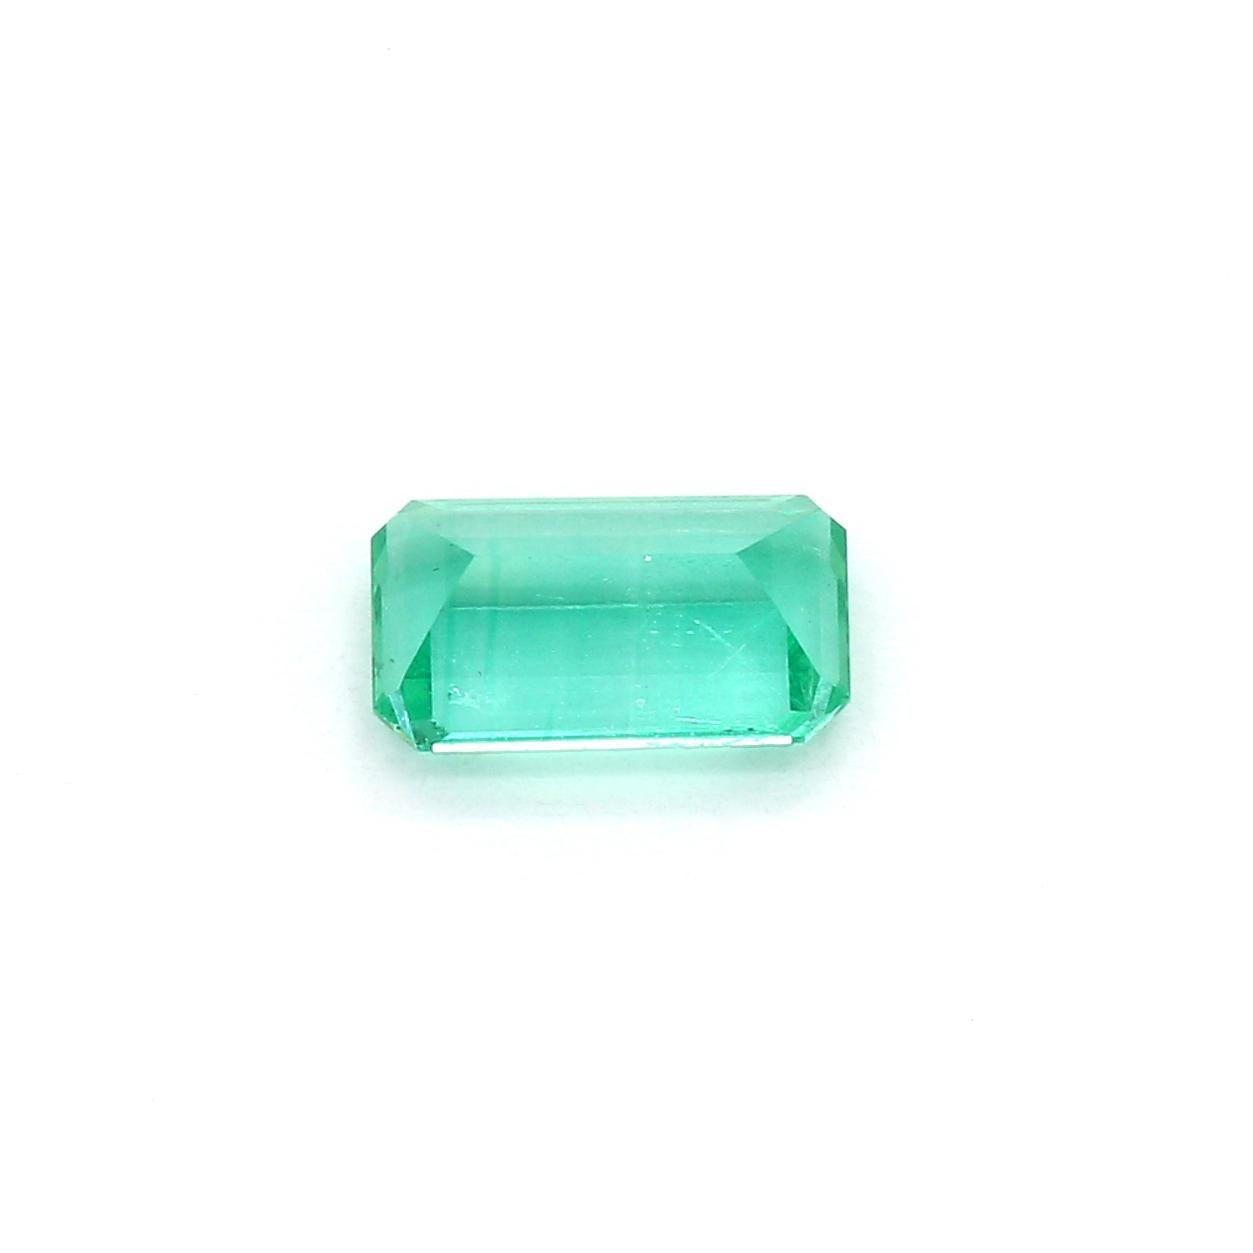 An amazing Russian Emerald which allows jewelers to create a unique piece of wearable art.
This exceptional quality gemstone would make a custom-made jewelry design. Perfect for a Ring or Pendant.

Shape - Octagon
Weight - 1.1 ct
Treatment - Minor